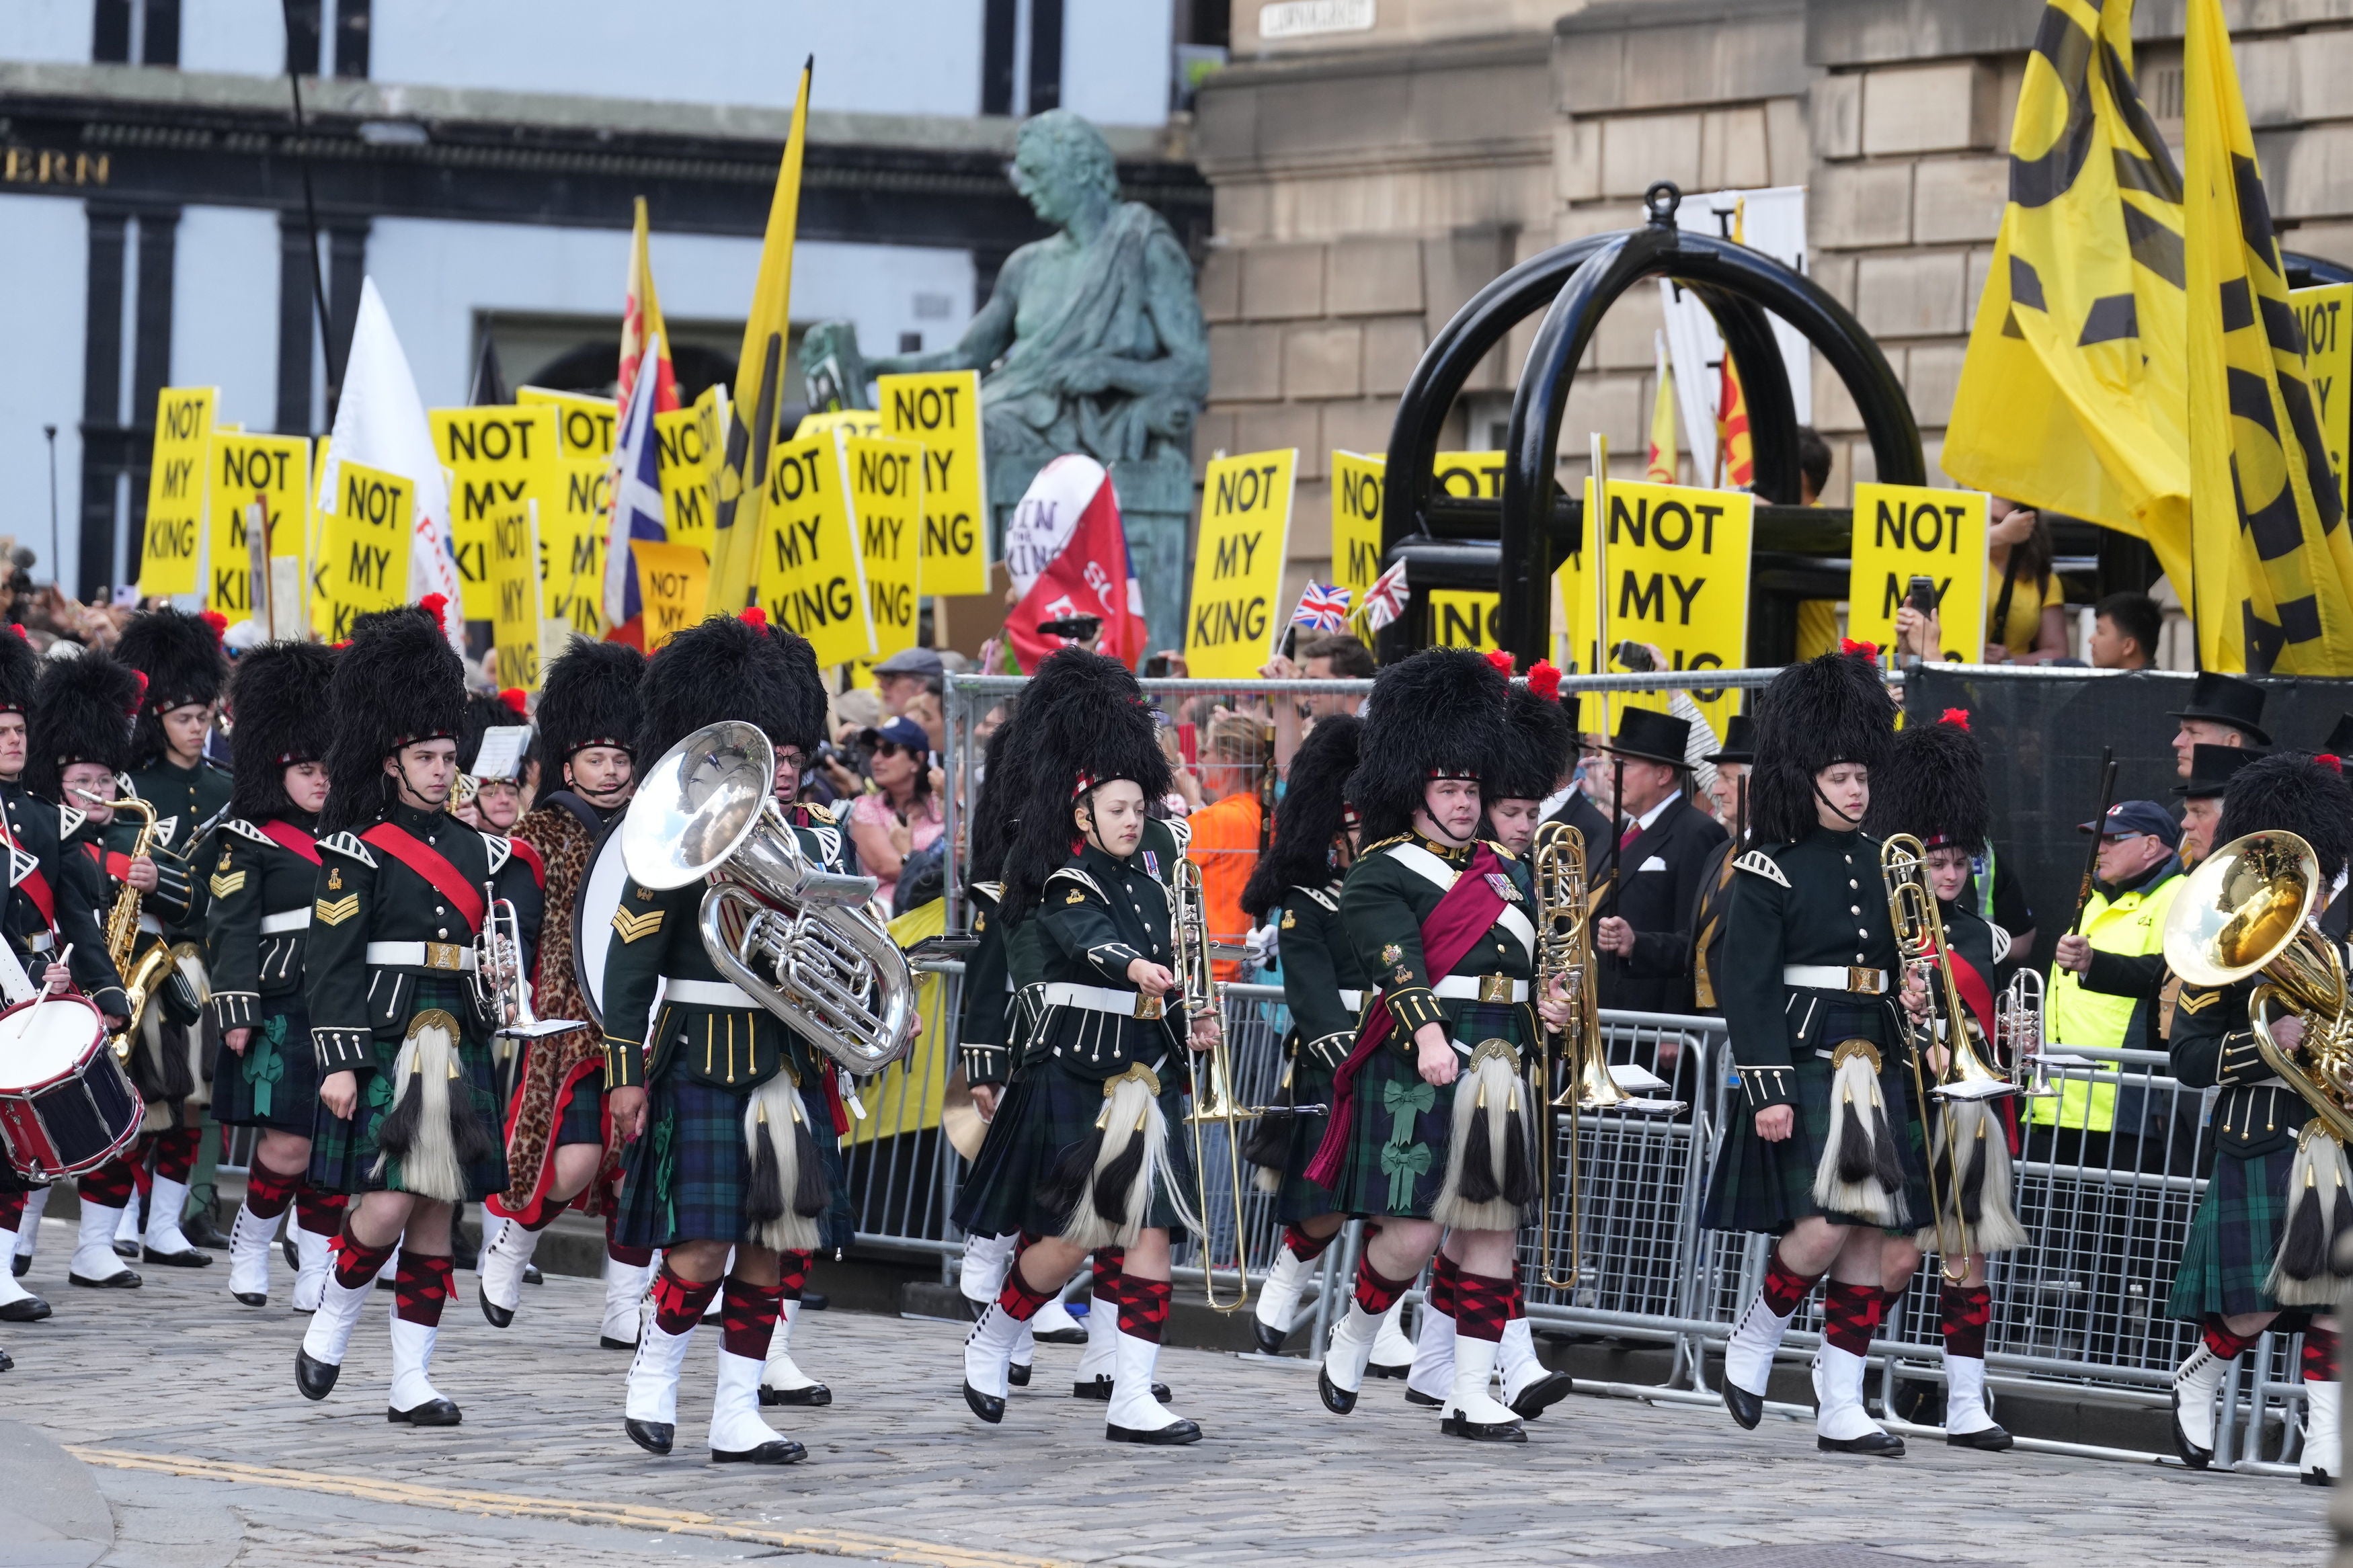 The Combined Cadet Force Pipes and Drums and the Cadet Military Band pass protesters